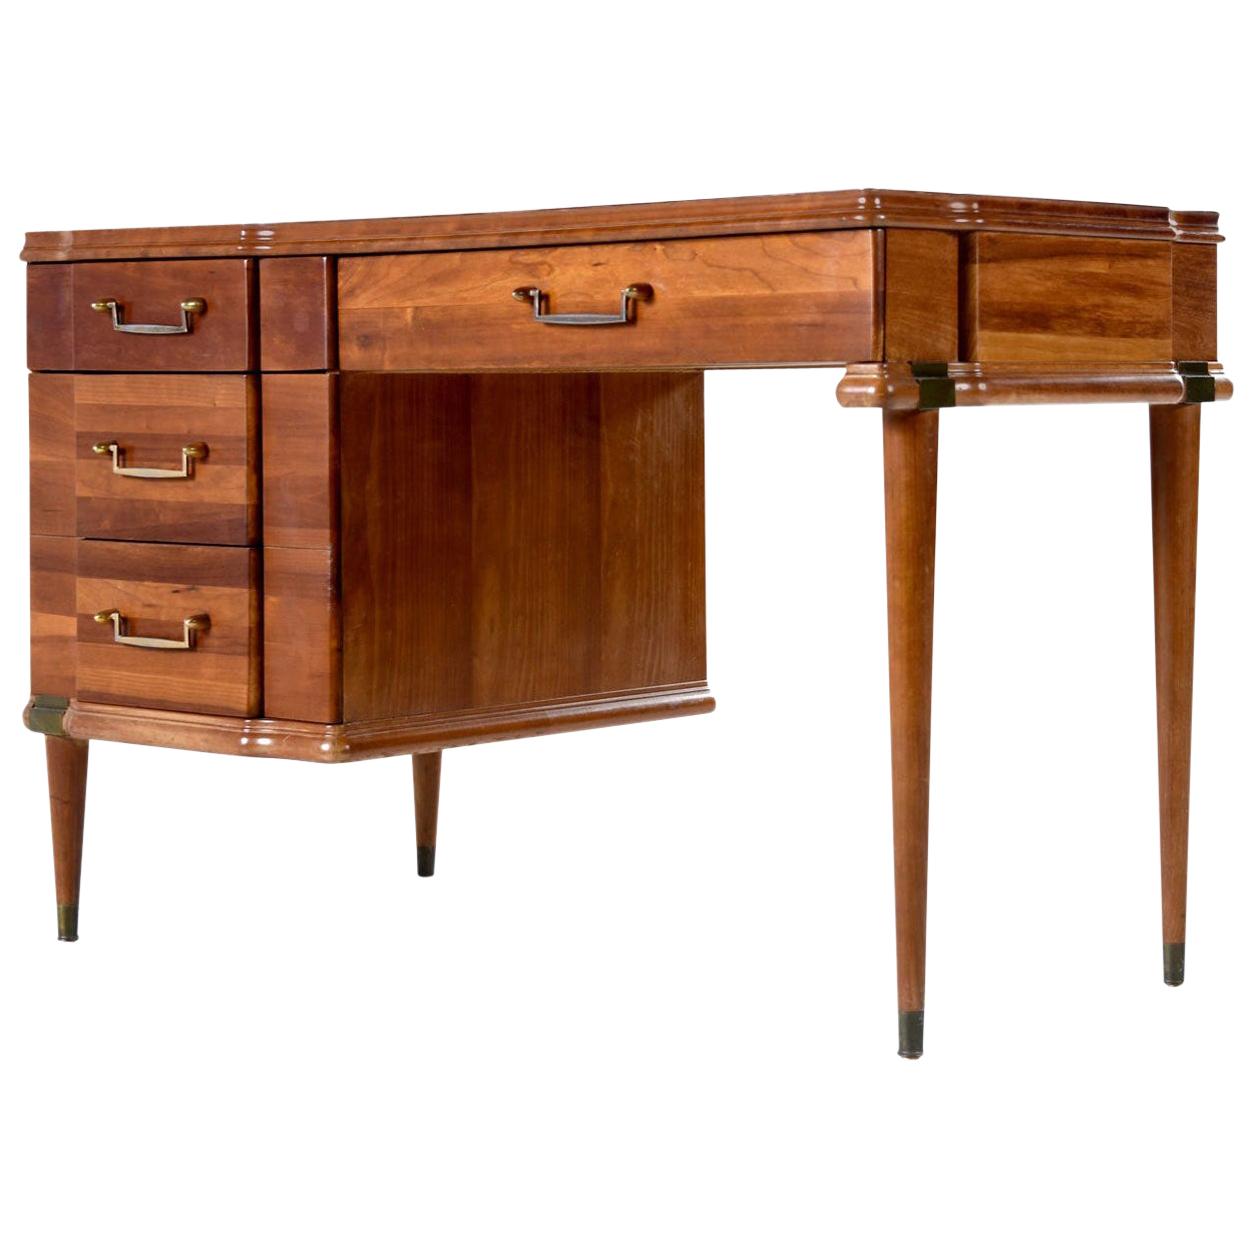 Machine Age Cherry Desk with Brass Accents by Hickory MFG